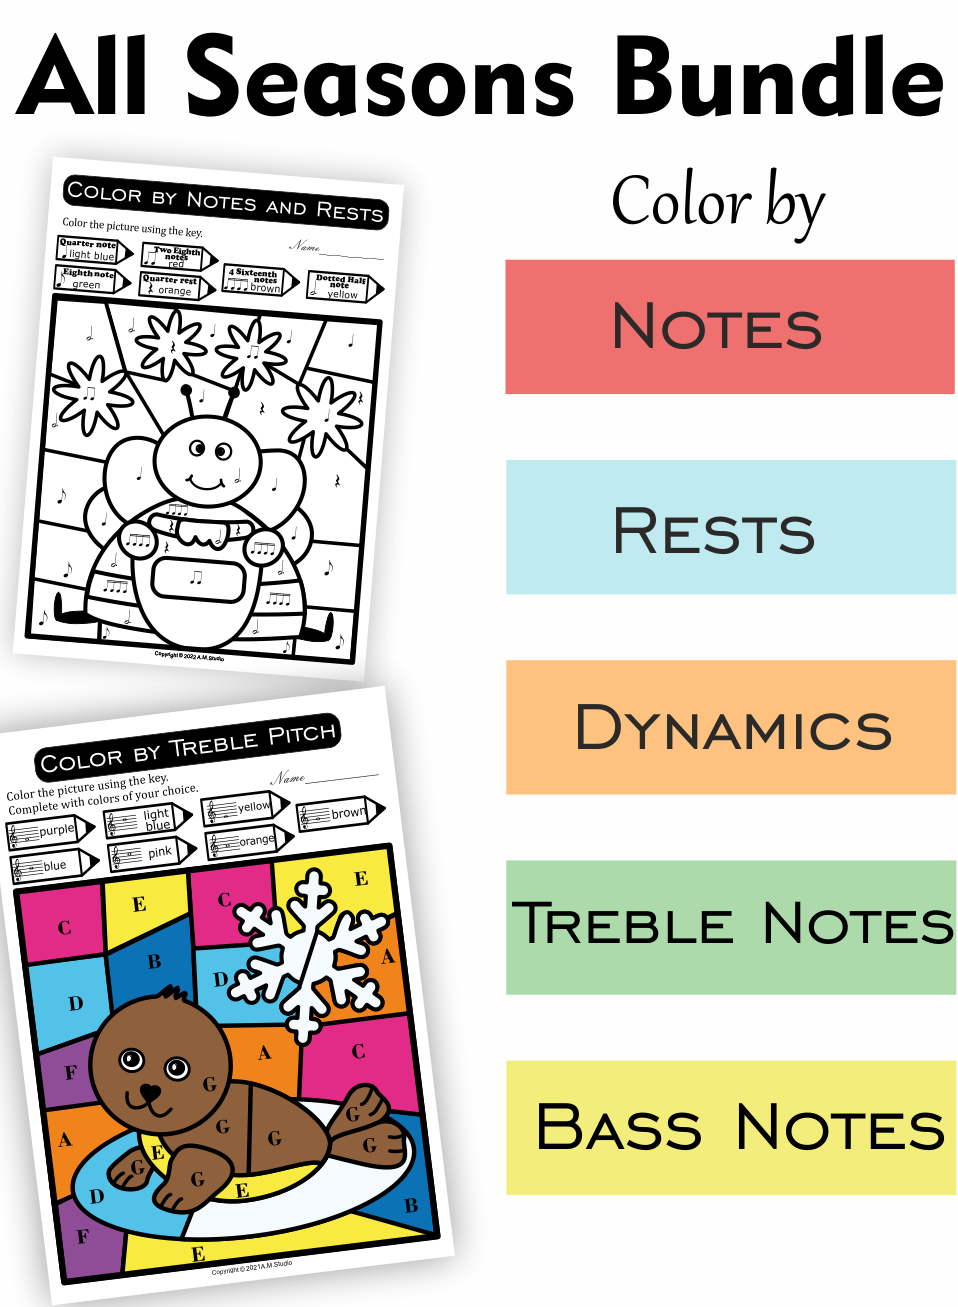 Music Color by Code Seasons Bundle | Color by Note Names, Dynamics, Symbols (img # 2)